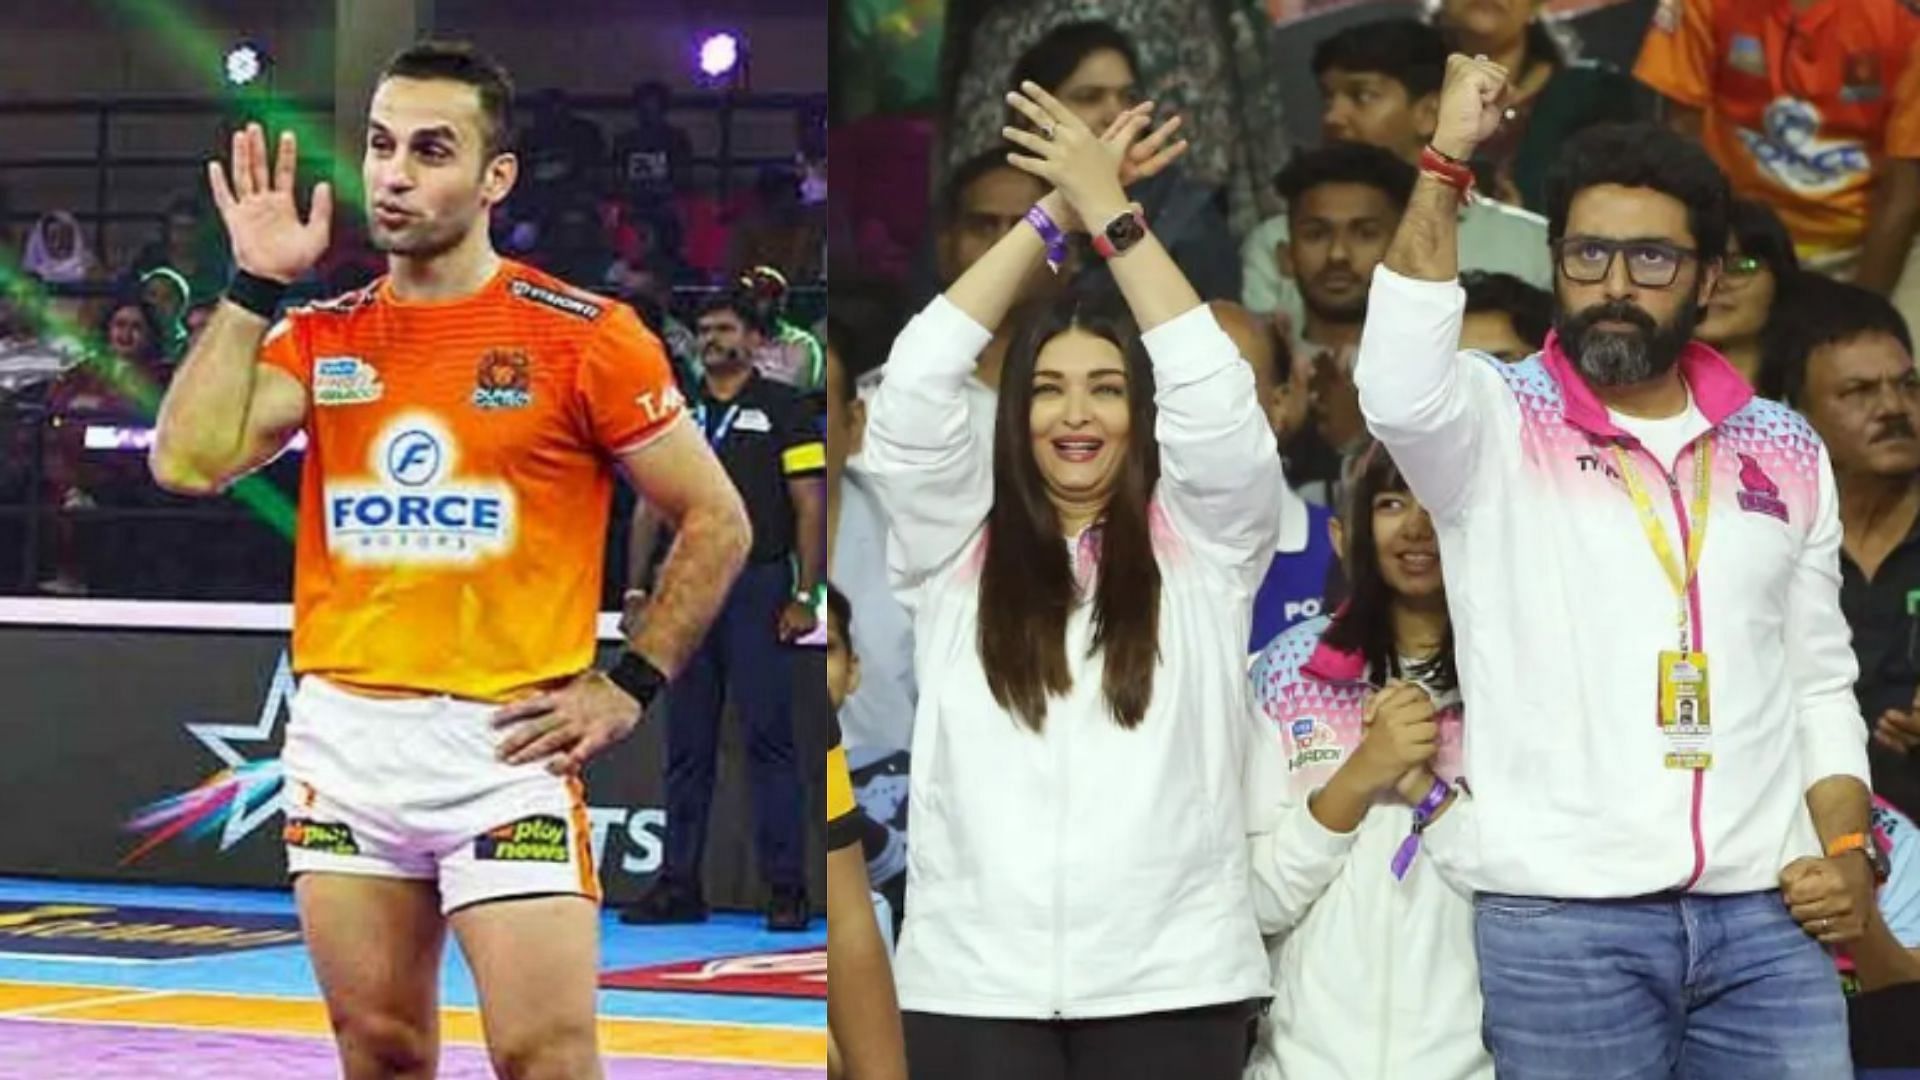 An Aishwarya Rai fan, Fazel Atrachali's opportunity to cement his Pro Kabaddi legacy at the cost of the Bachchan family's dismay